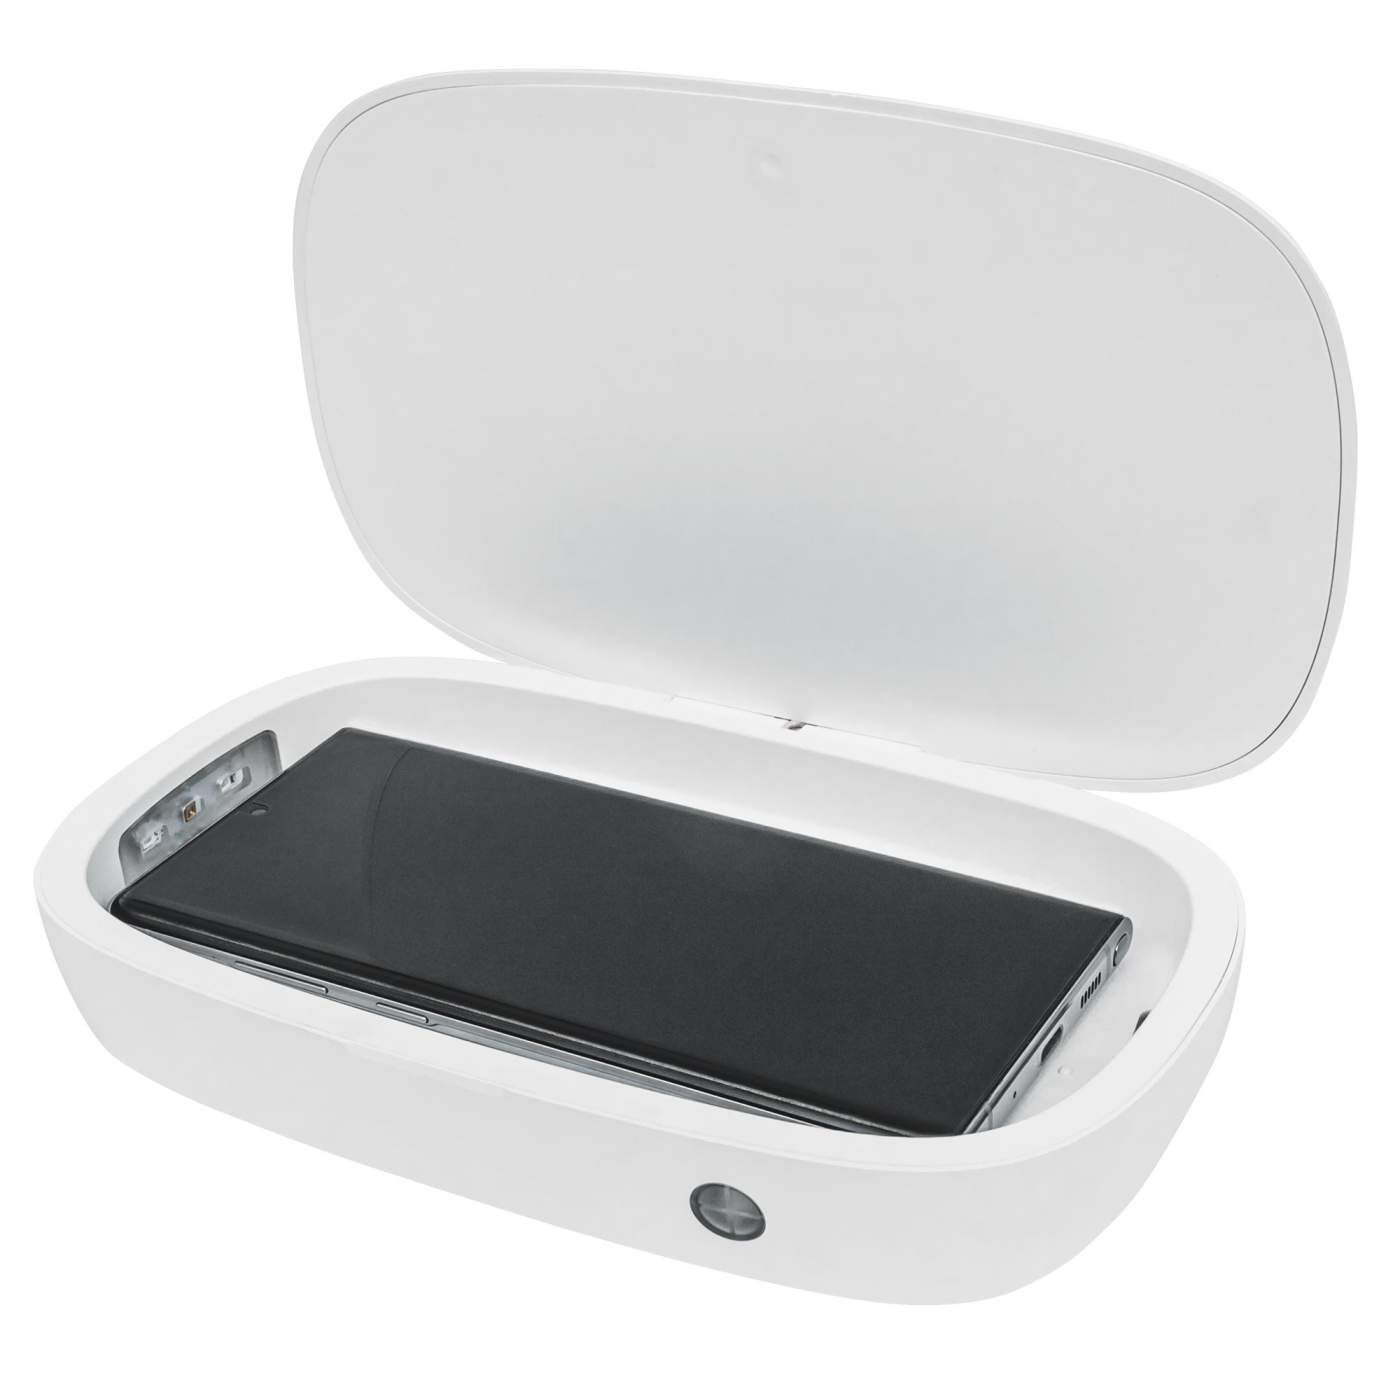 Smart Phone Sanitizer Box with Fast Wireless Charger for Mobile Phones Image 3